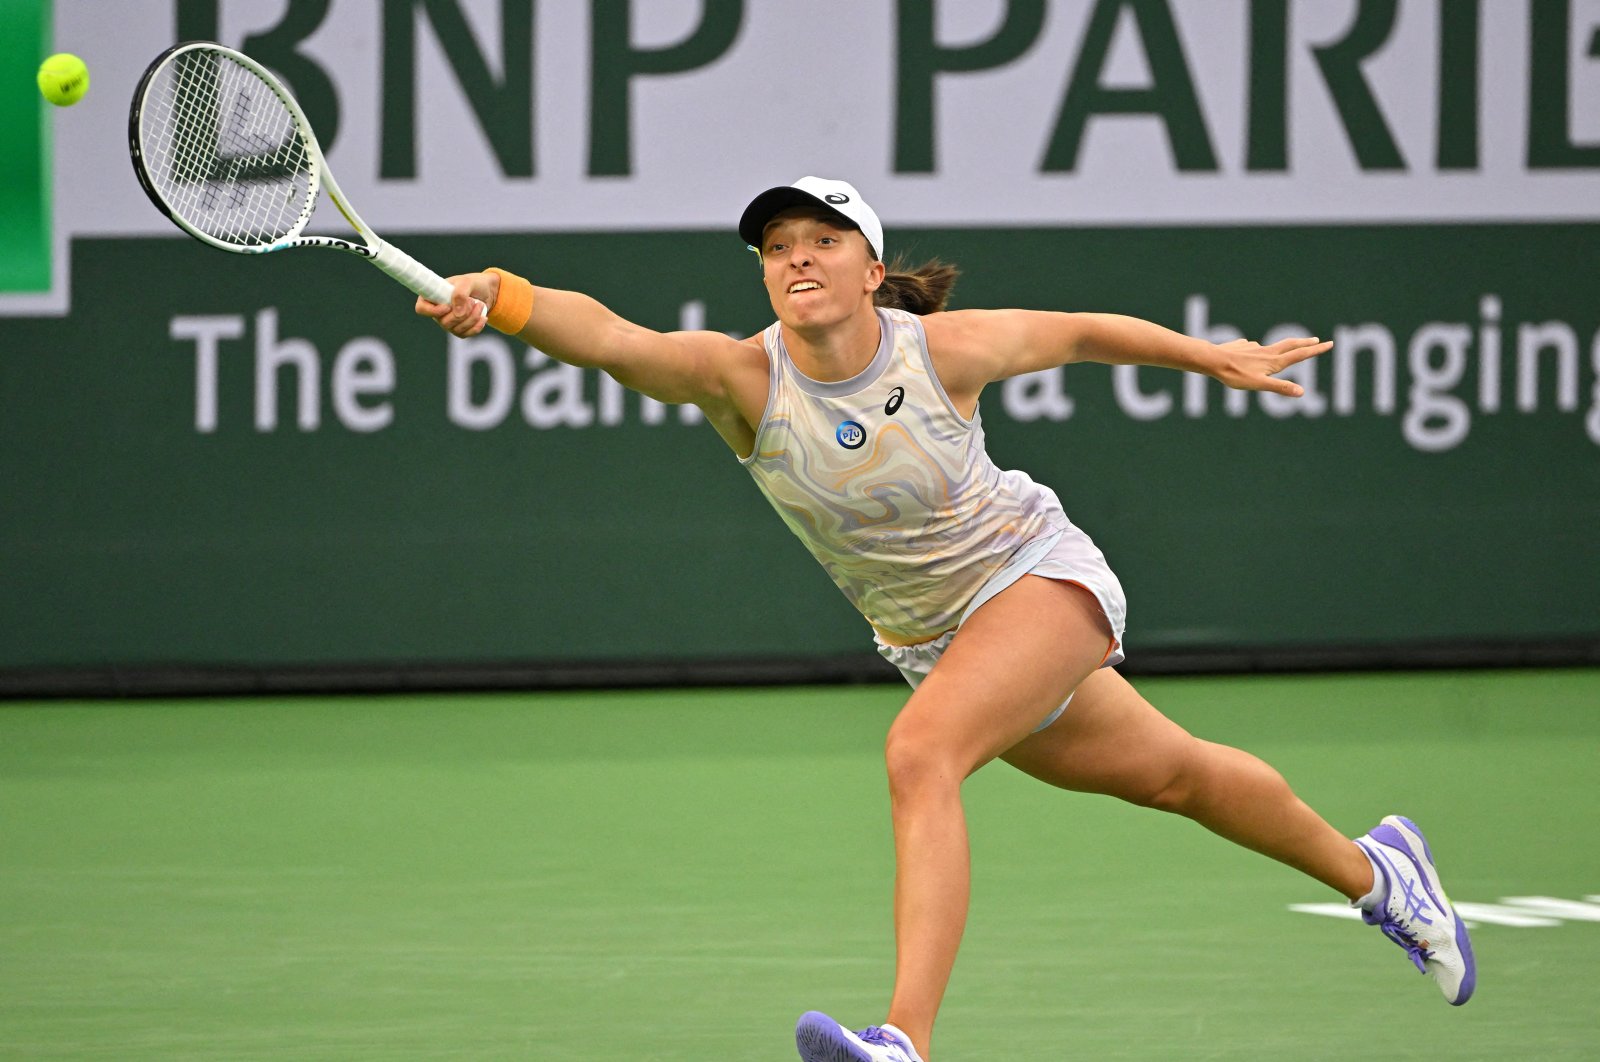 Poland&#039;s Iga Swiatek hits a shot in the semifinal match against Kazakhstan&#039;s Elena Rybakina in the BNP Paribas Open at the Indian Wells Tennis Garden, Indian Wells, US., March 17, 2023. (Reuters Photo)